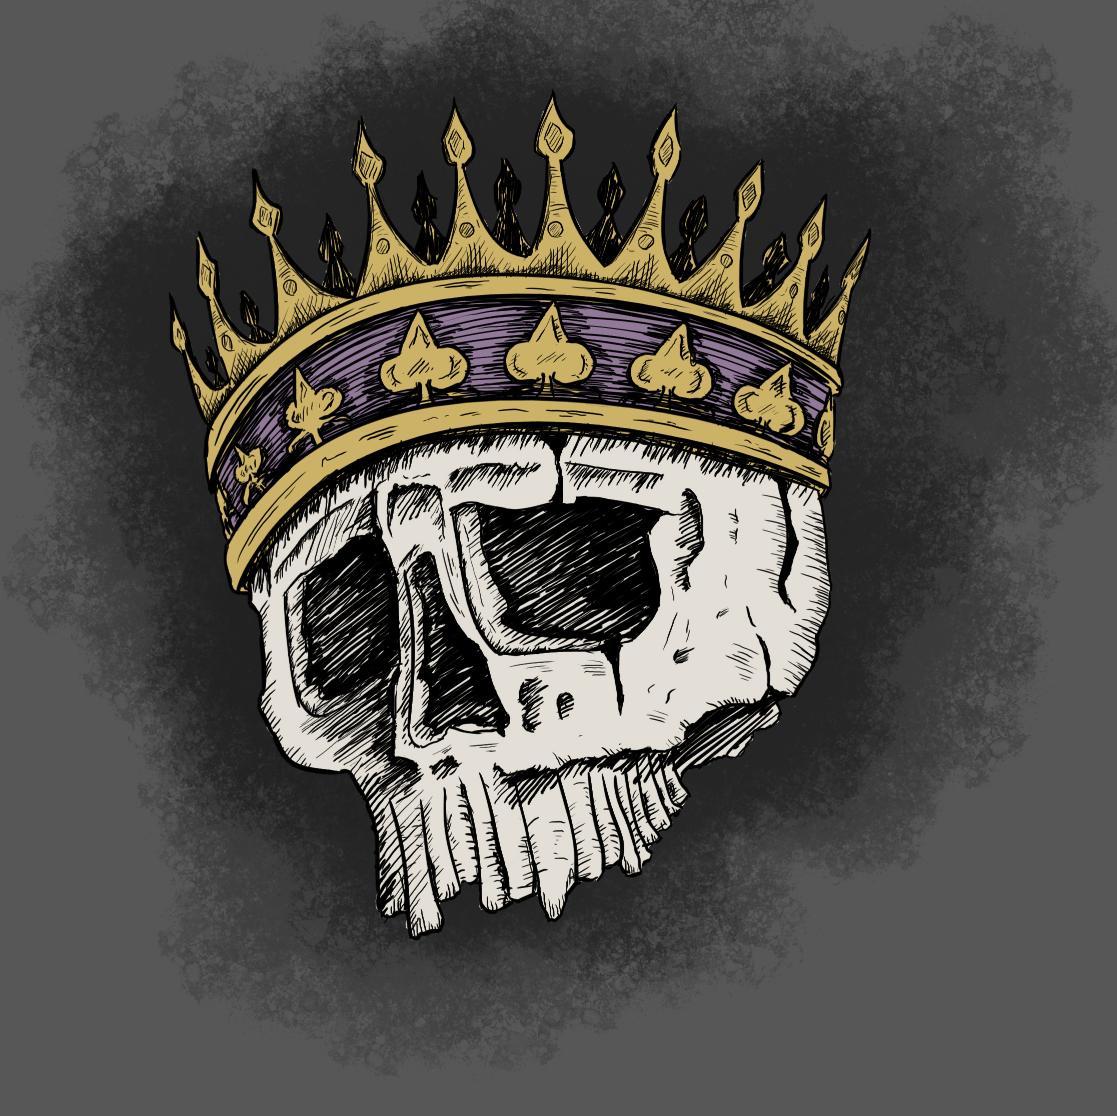 Partnered variety streamer on Twitch! Also runs a Miniatures business - https://t.co/WjlBk5rMfX